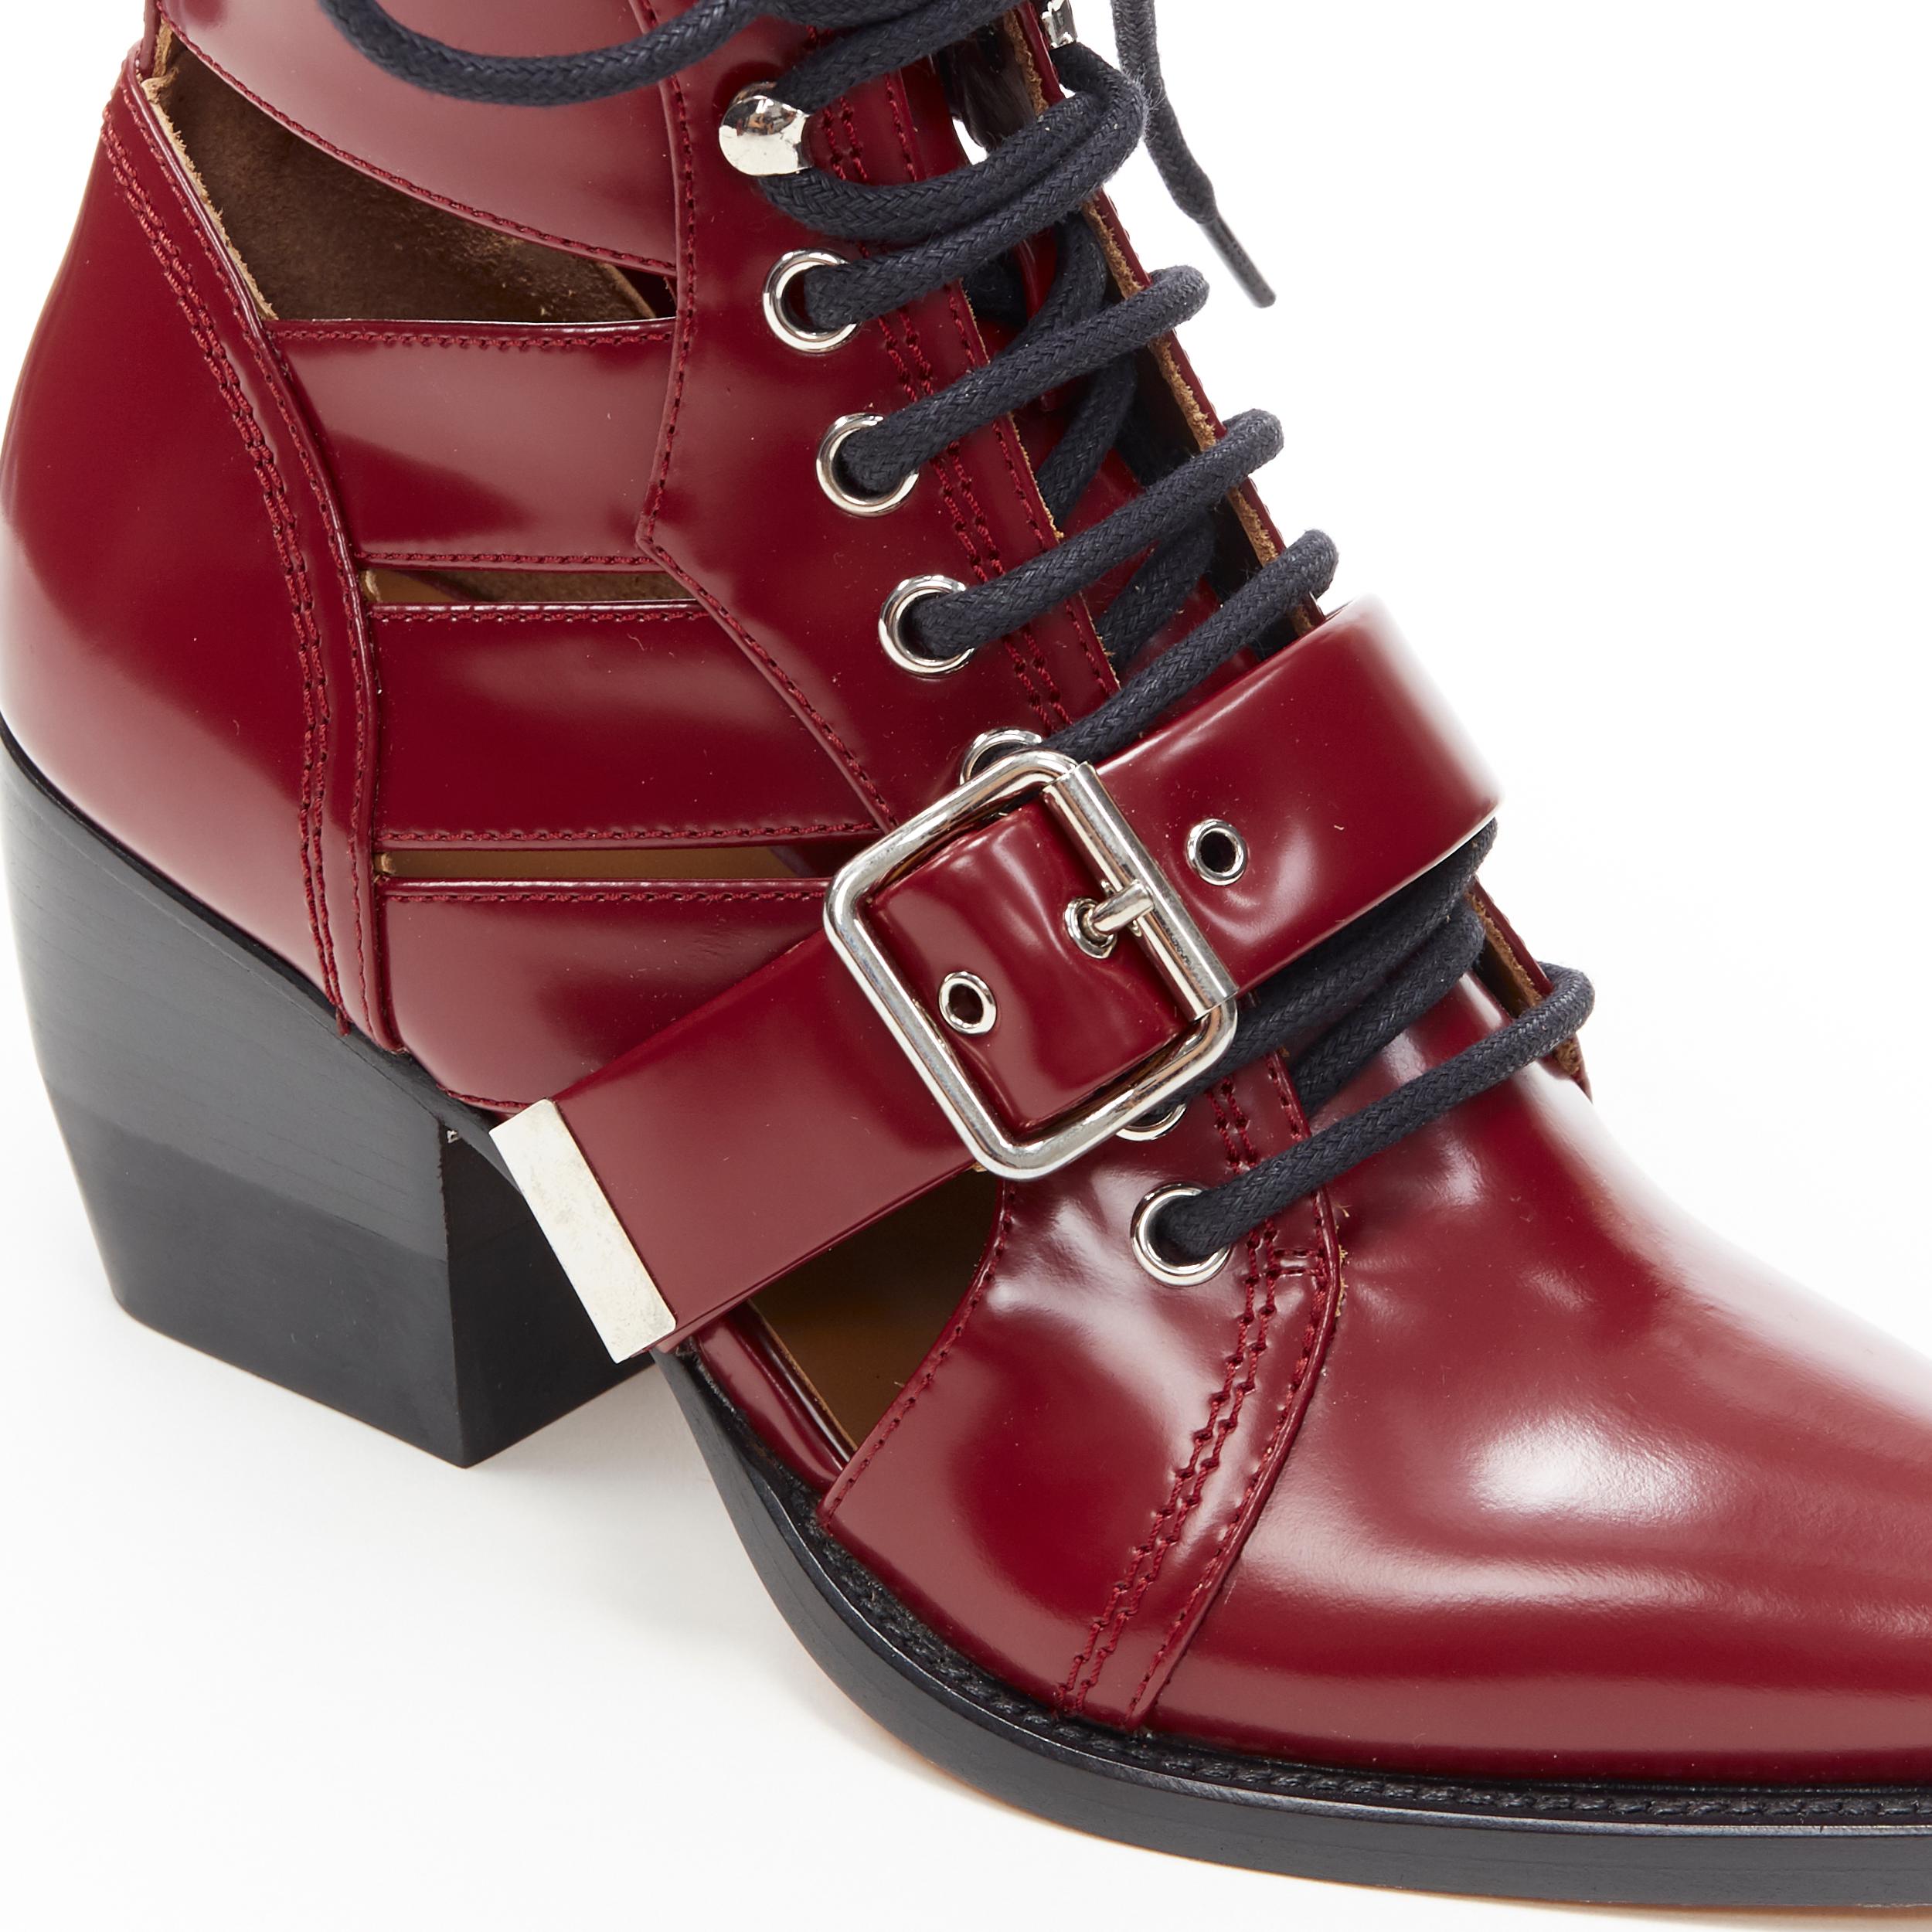 new CHLOE Rylee burgundy red leather cut out buckled pointy ankle boot EU38 3